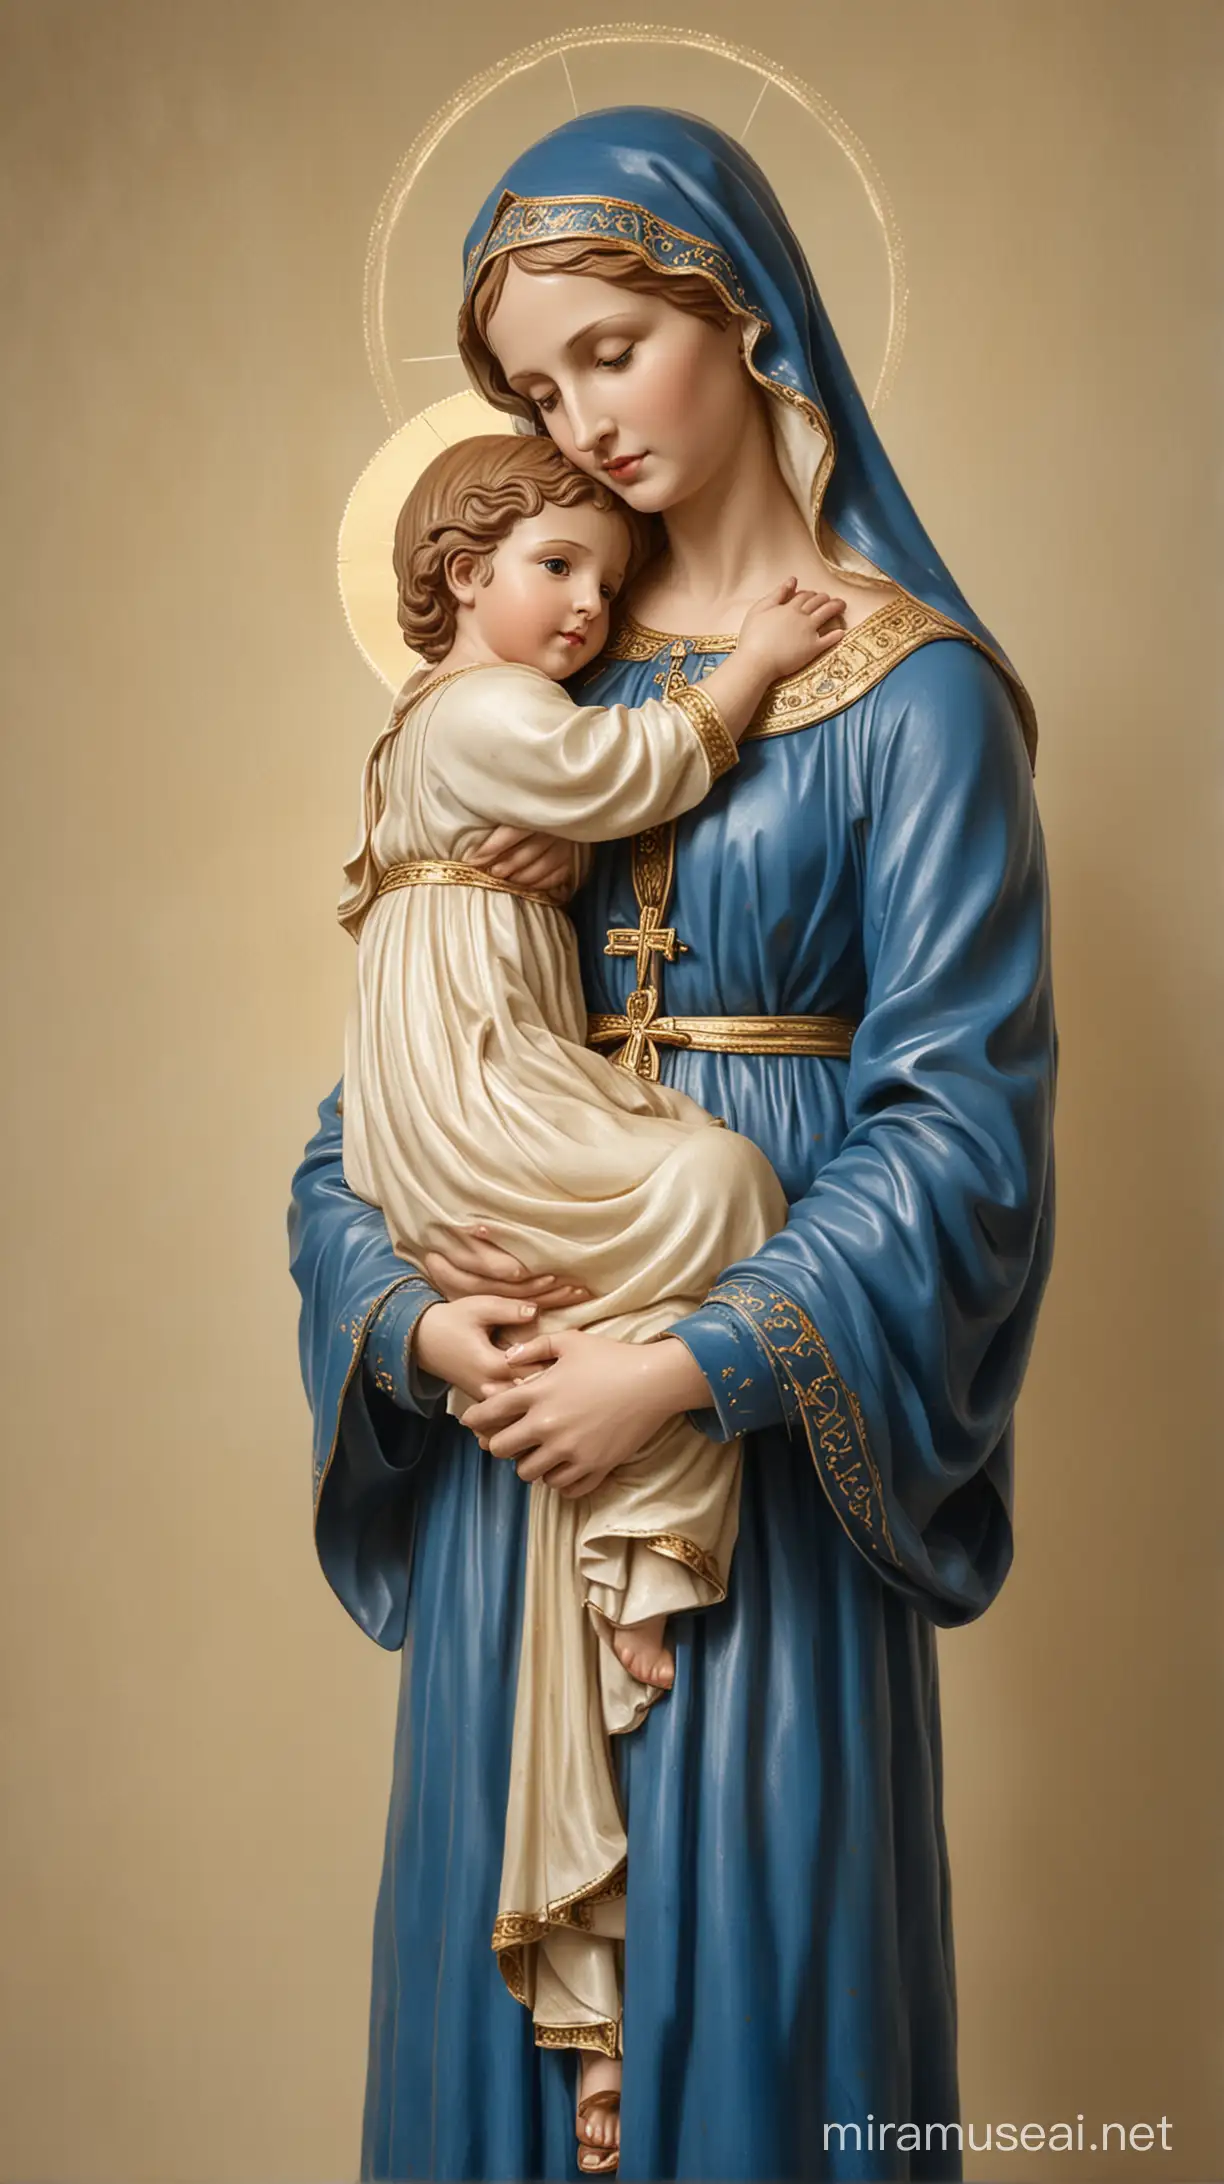 Motherly Embrace Our Lady in Blue Dress Tenderly Hugs Children